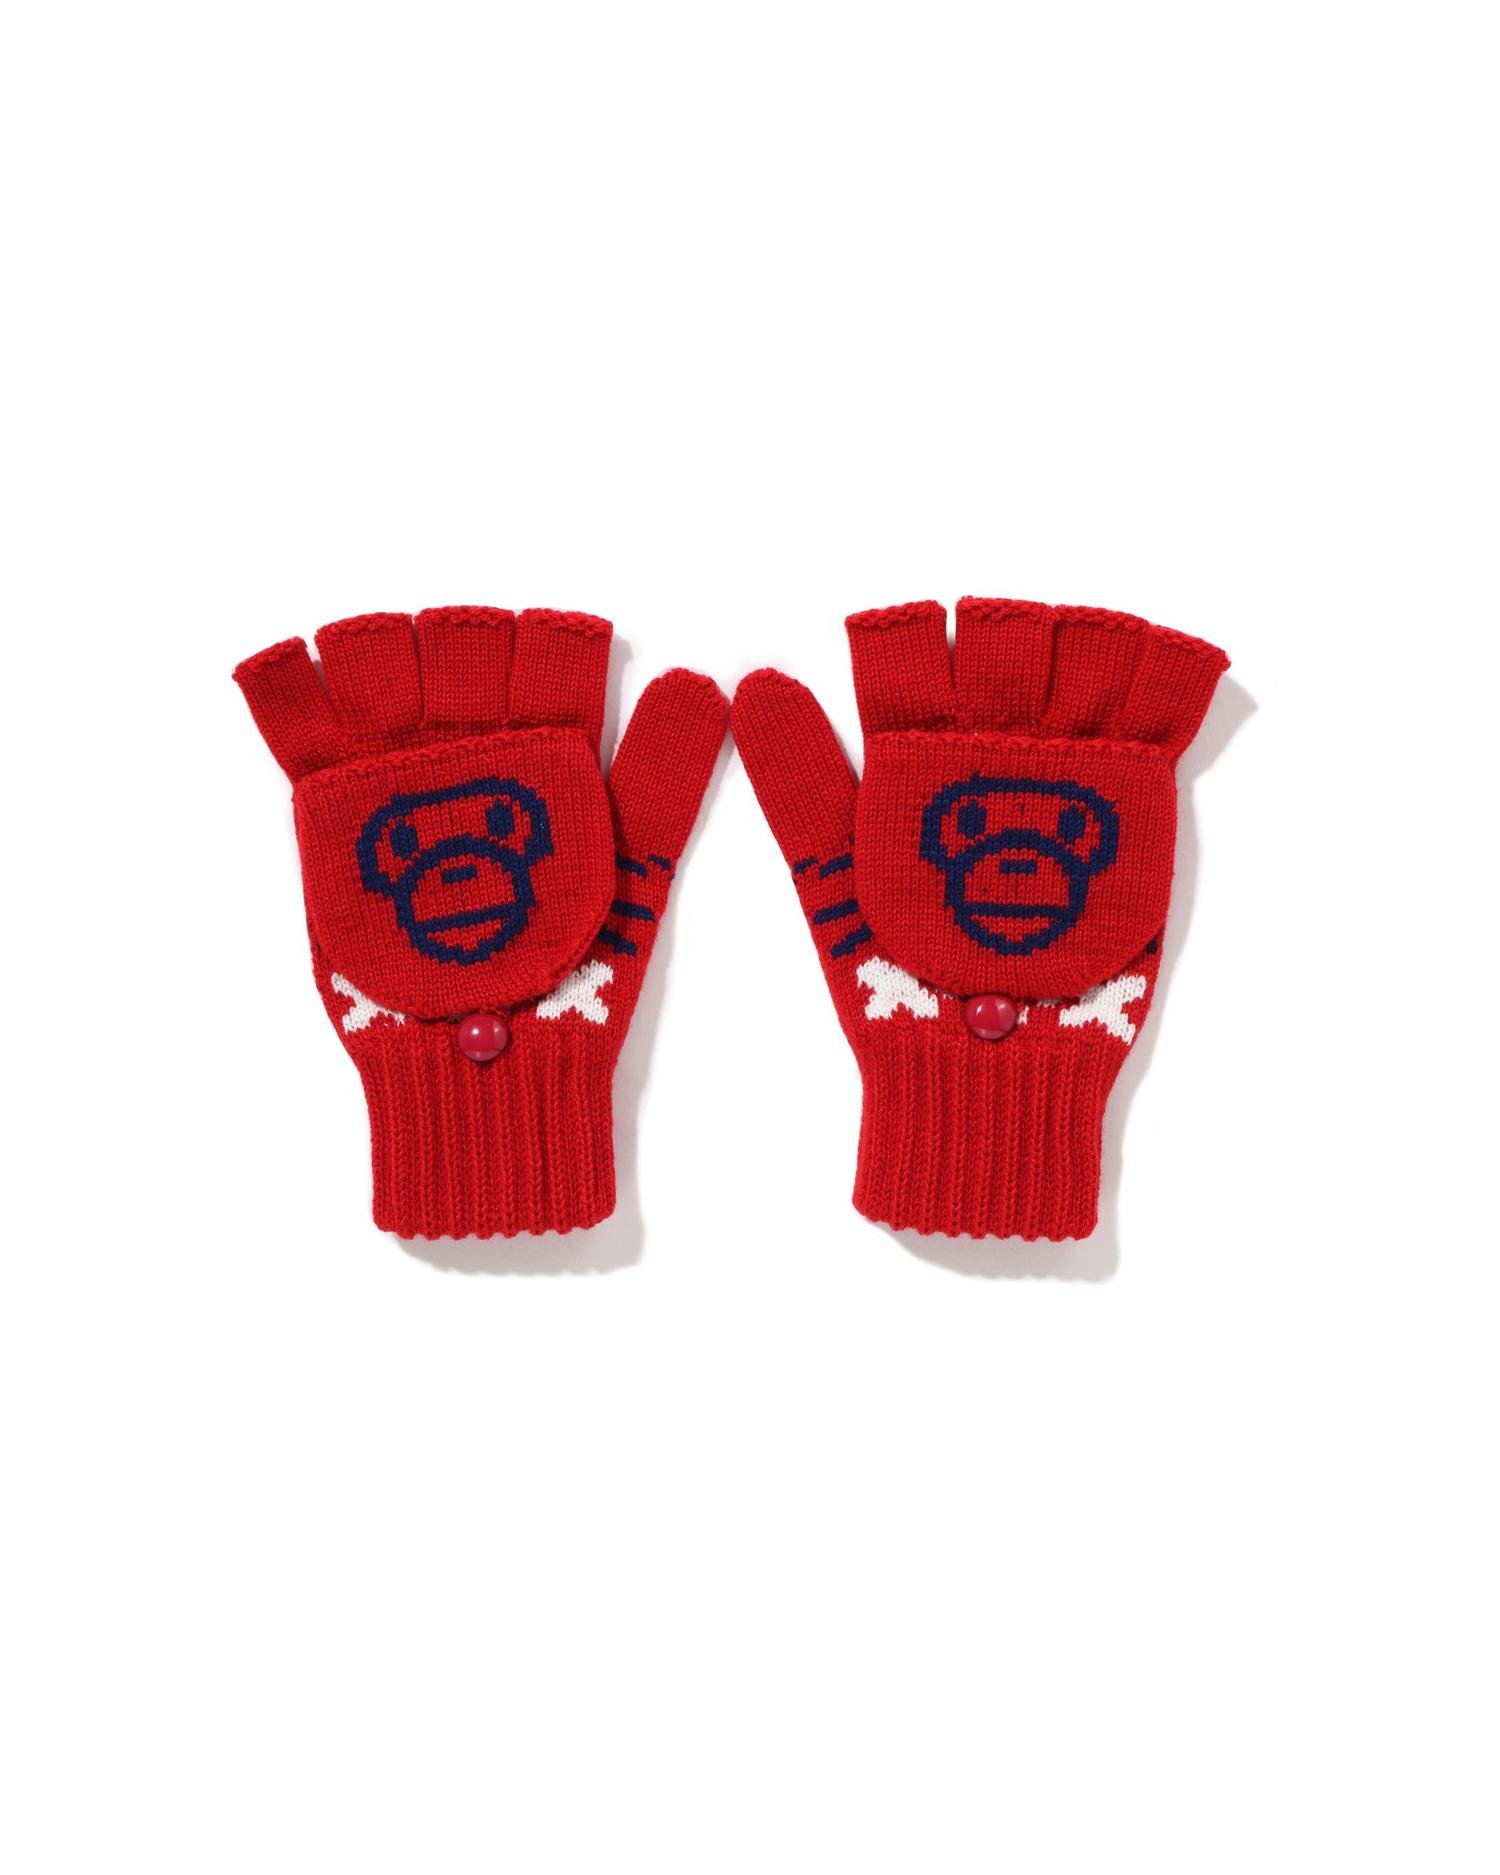 Baby Milo Nordic Knit Gloves by BAPE